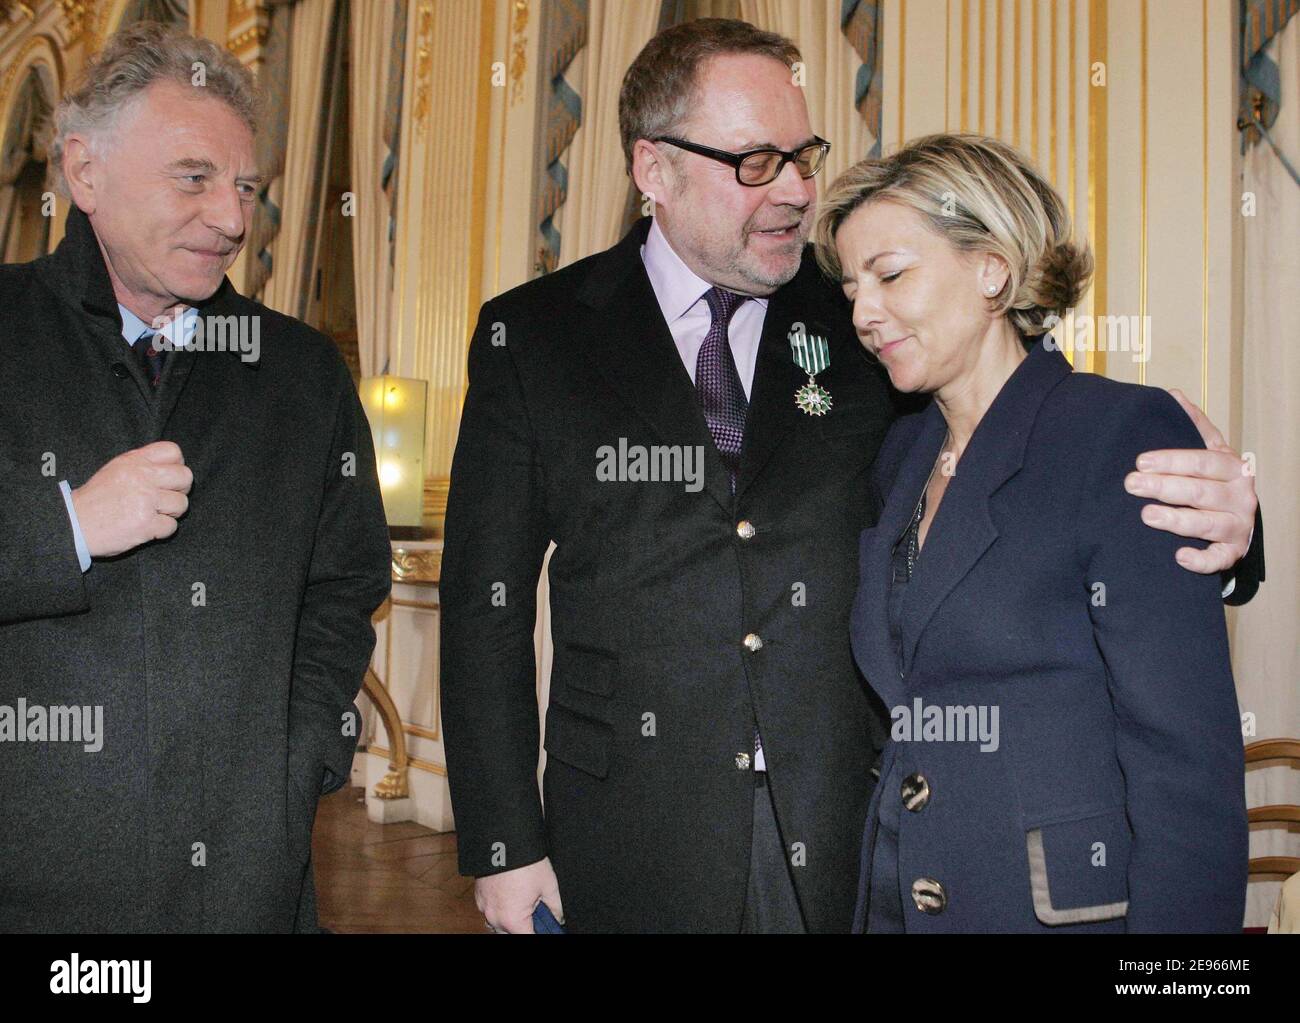 French PR Dominique Segall (c) poses with Claire Chazal and Robert Namias after receiving the 'Chevalier dans l'ordre des Arts et Lettres' medal from French culture minister Renaud Donnedieu de Vabres during a ceremony held at the ministry in Paris, France on March 17, 2006. Photo by Thierry Orban/ABACAPRESS.COM Stock Photo